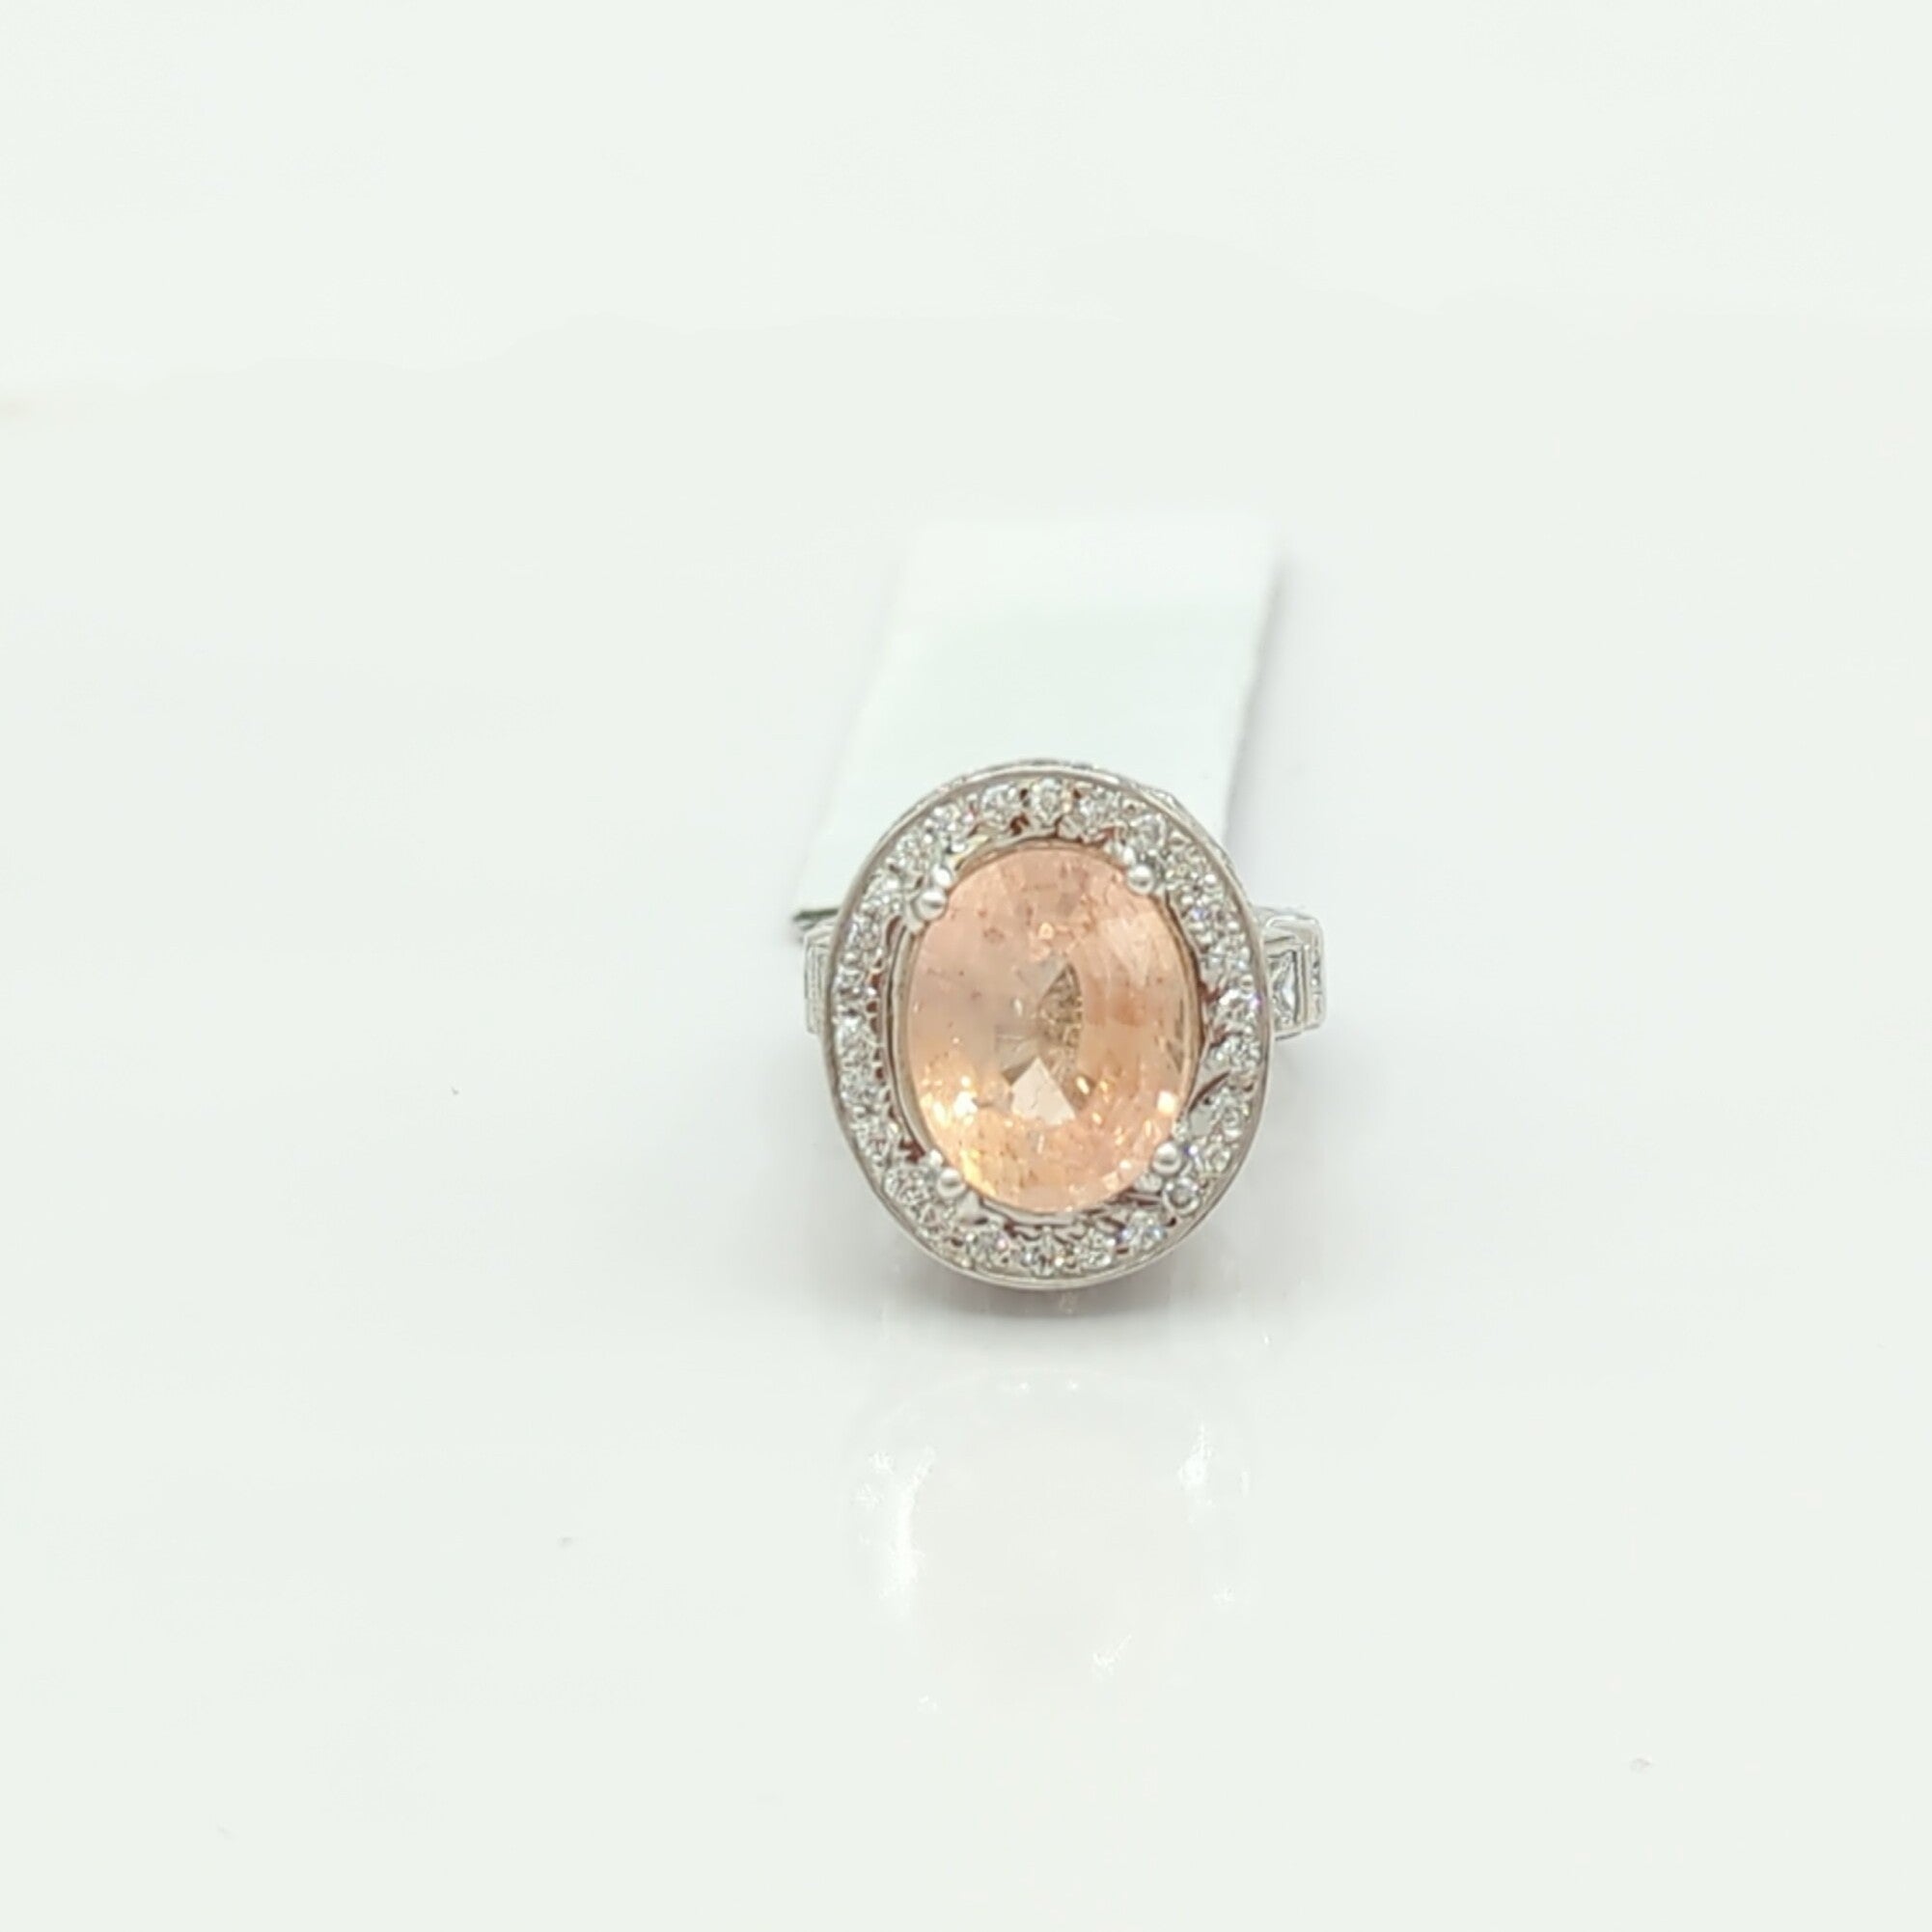 GIA Unheated Light Orange Sapphire and Diamond Cocktail Ring in 18k White Gold